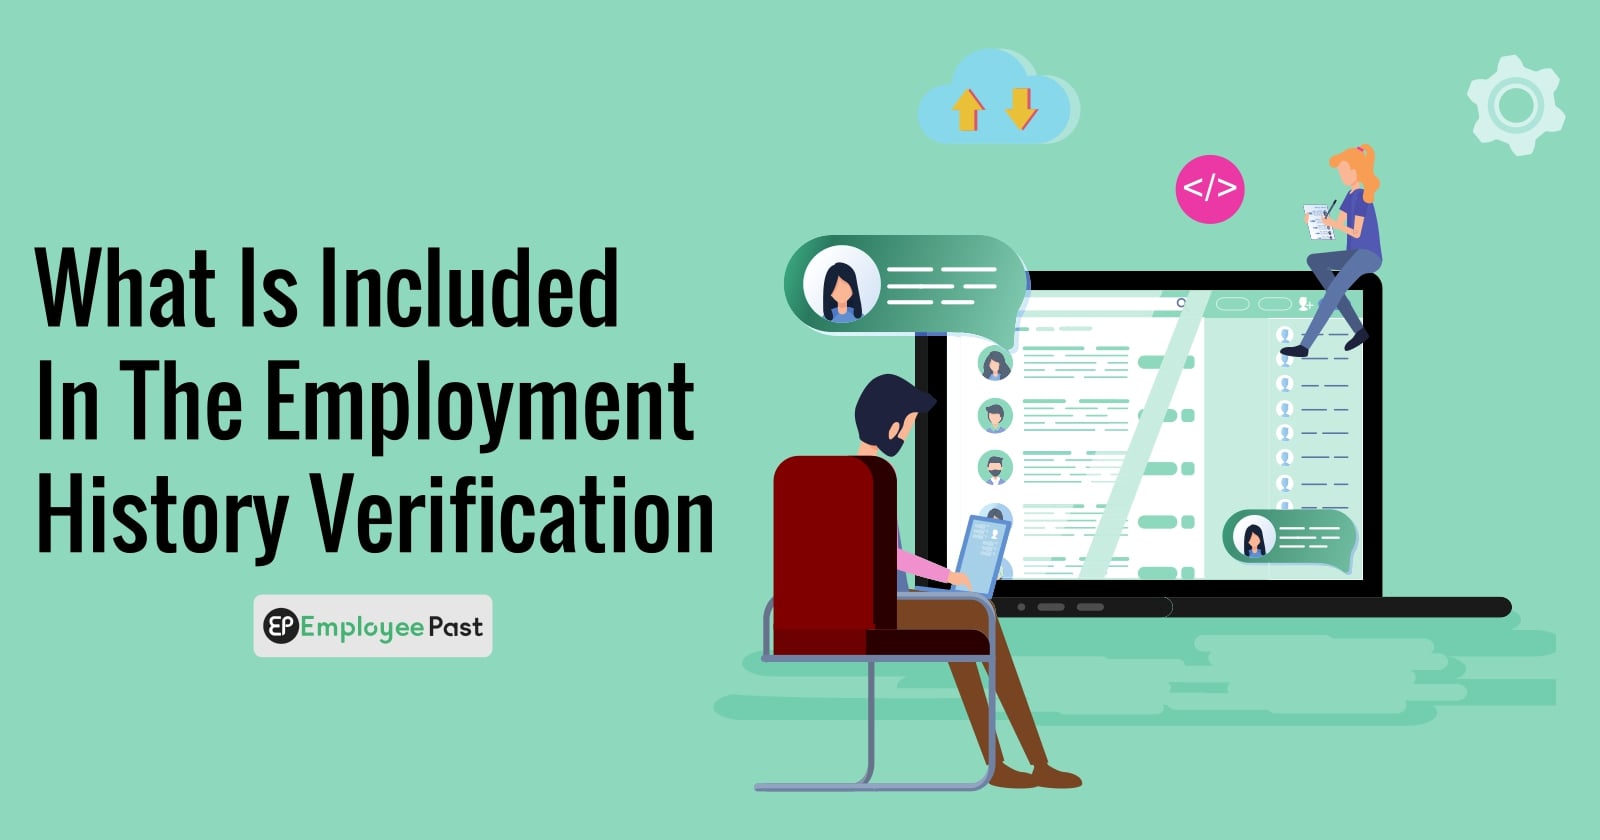 What Is Included in the Employment History Verification